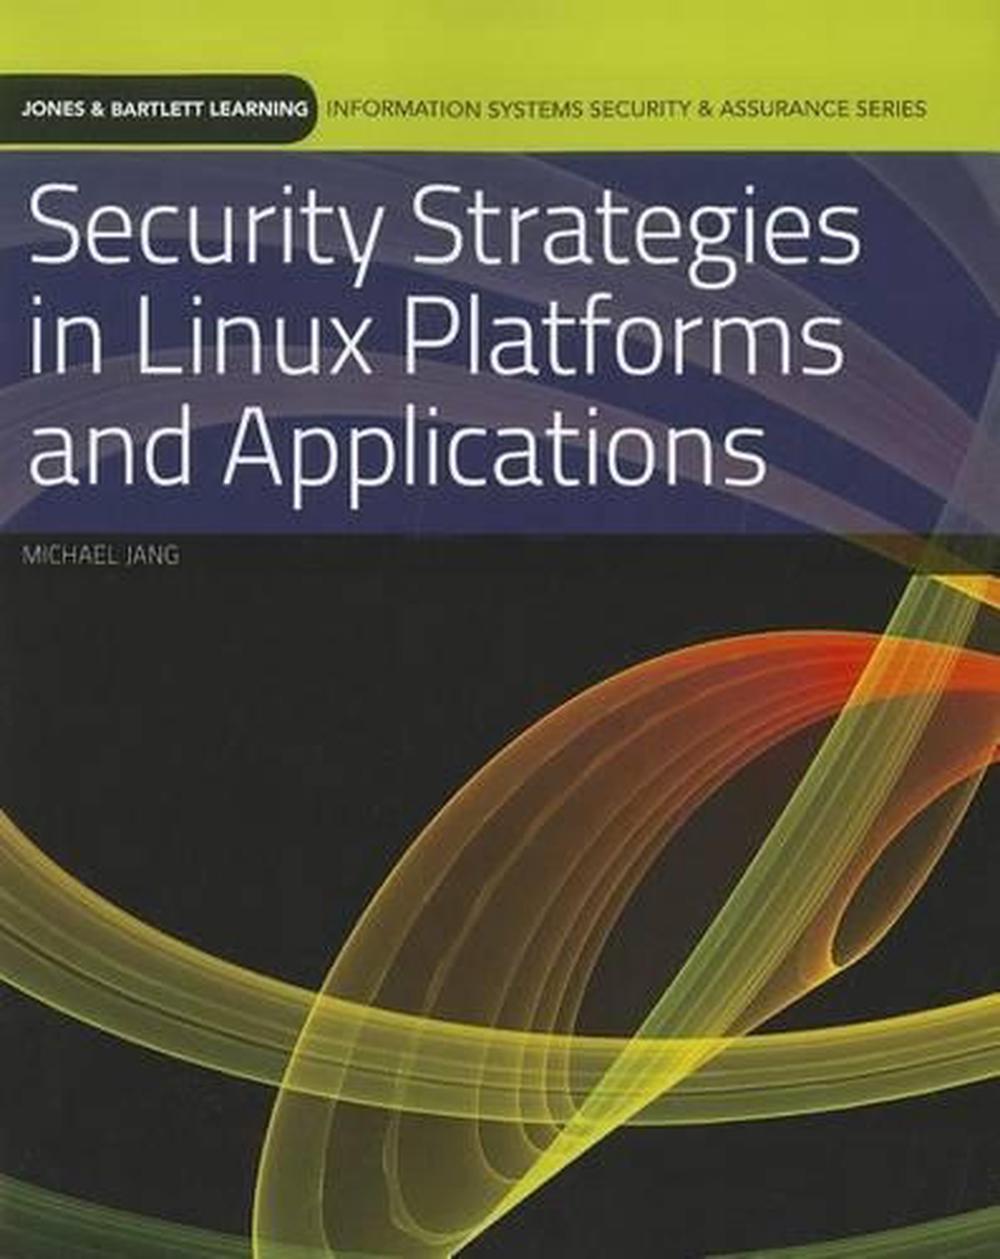 Security Strategies in Linux Platforms and Applications by Michael Jang (English 9780763791896